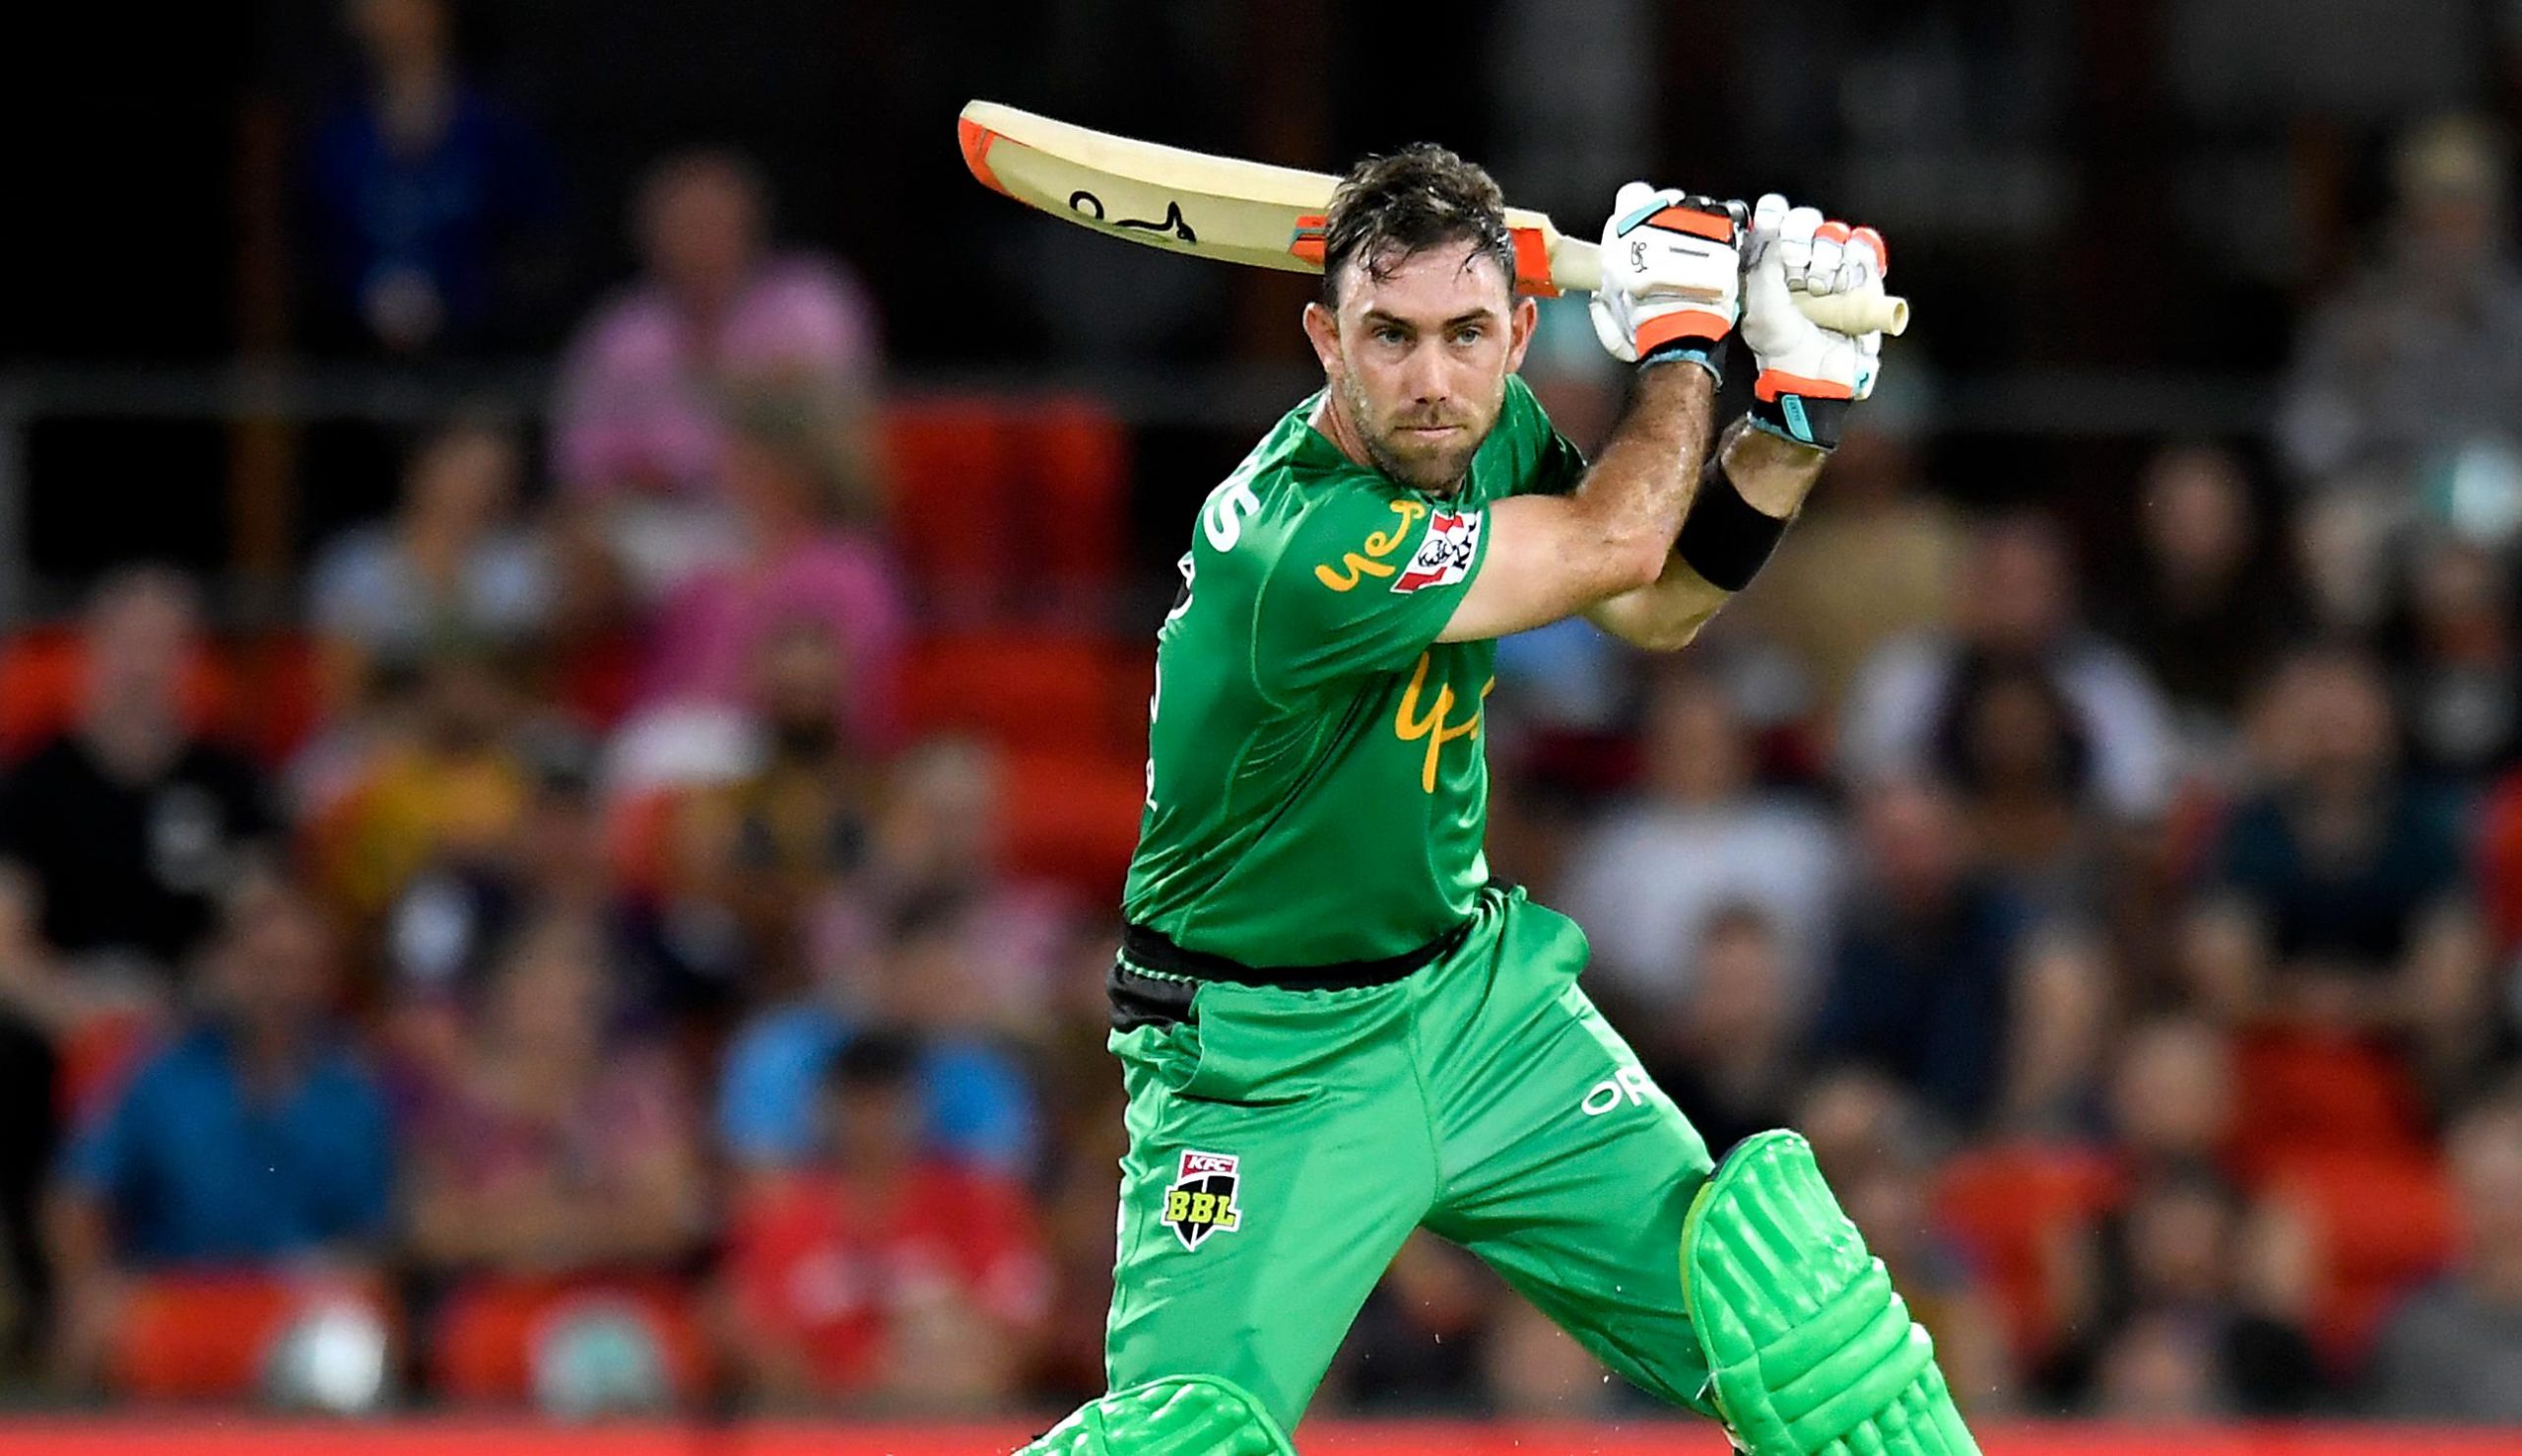 Glenn Maxwell smashes 2nd fastest hundred in BBL en route to 154 off 64